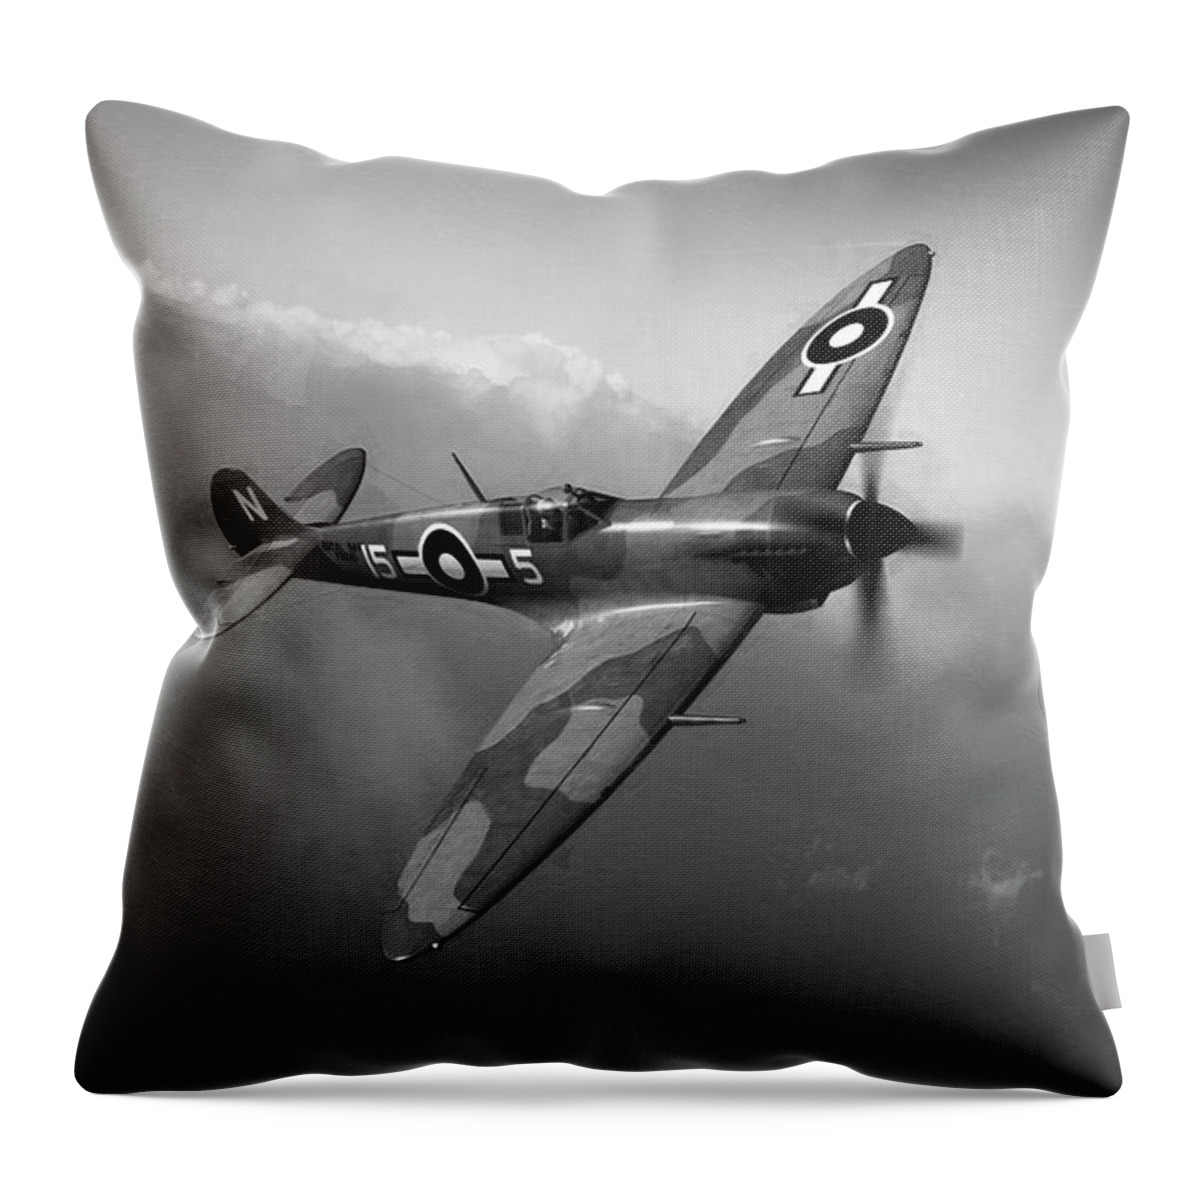 Wwii Throw Pillow featuring the digital art Seafire Over Sea - Monochrome by Mark Donoghue